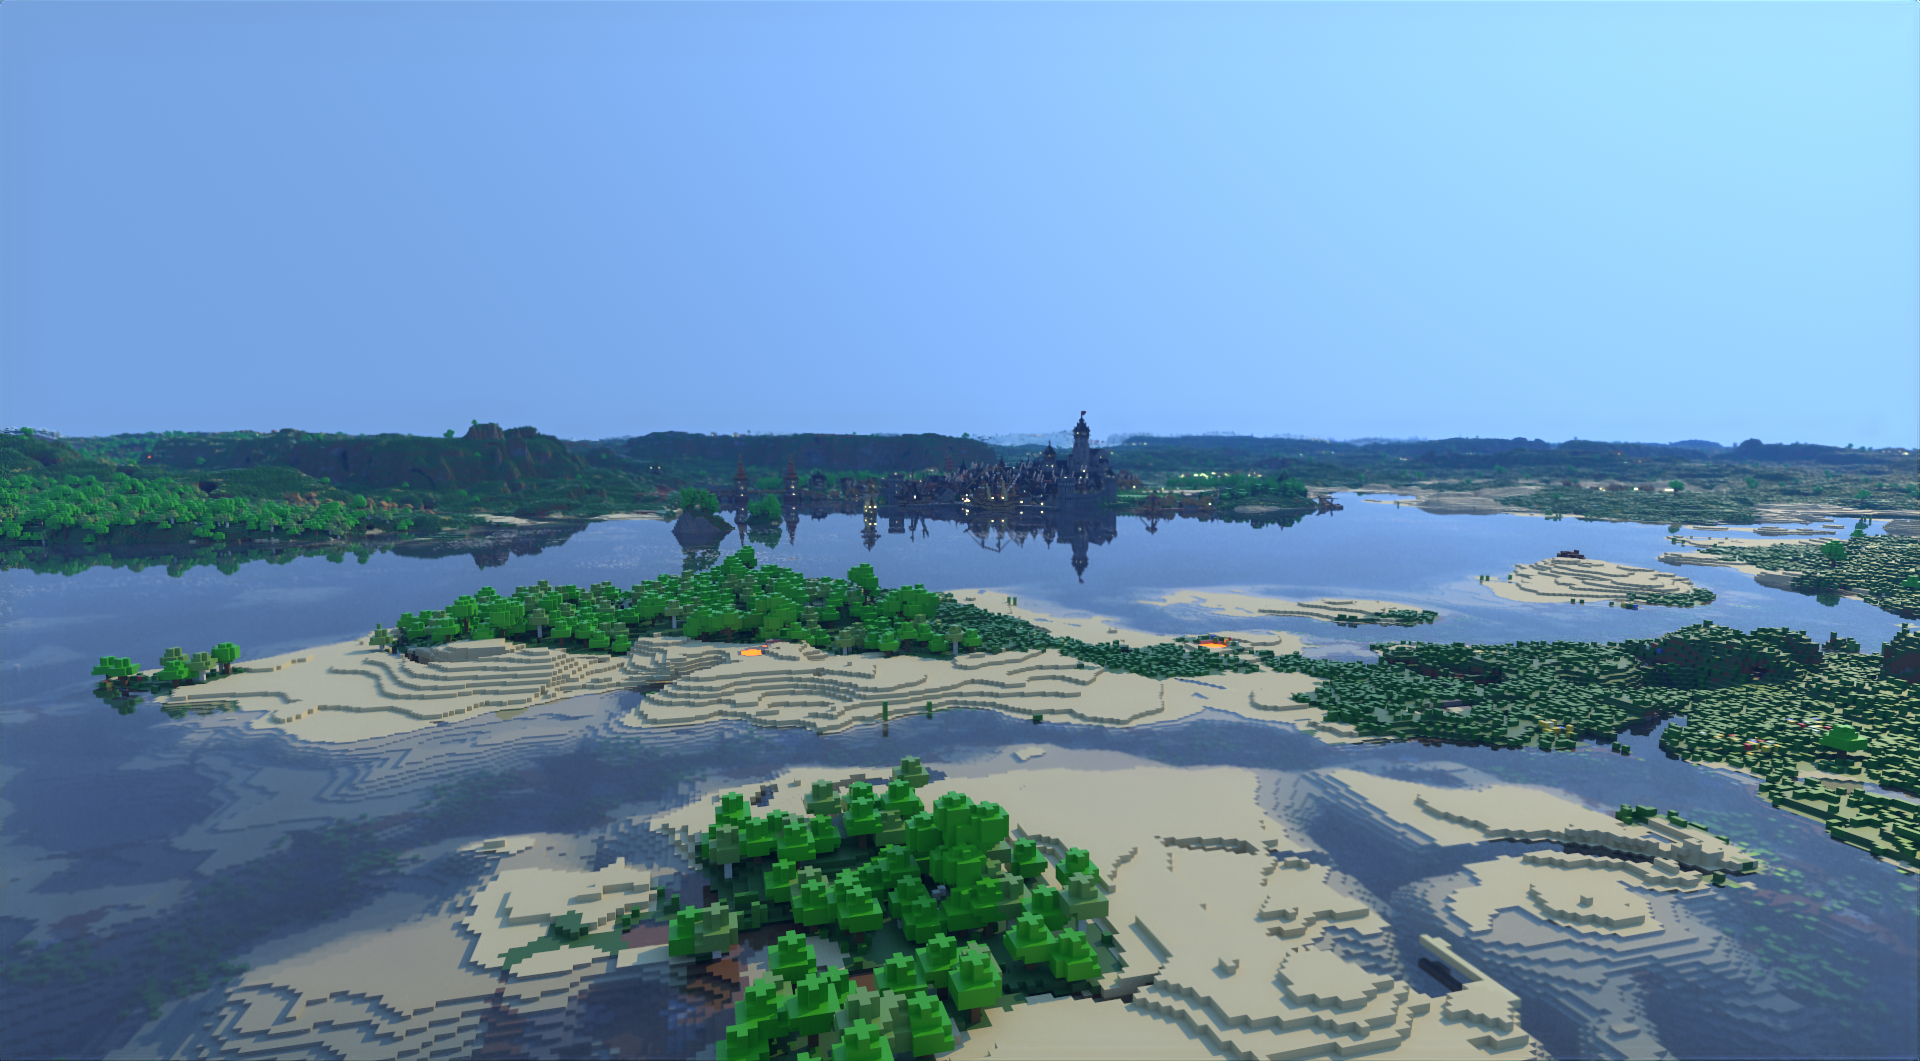 Avoyd_2022-02-10_08-08_world_0_PathTraced_DenoisedHQ.png